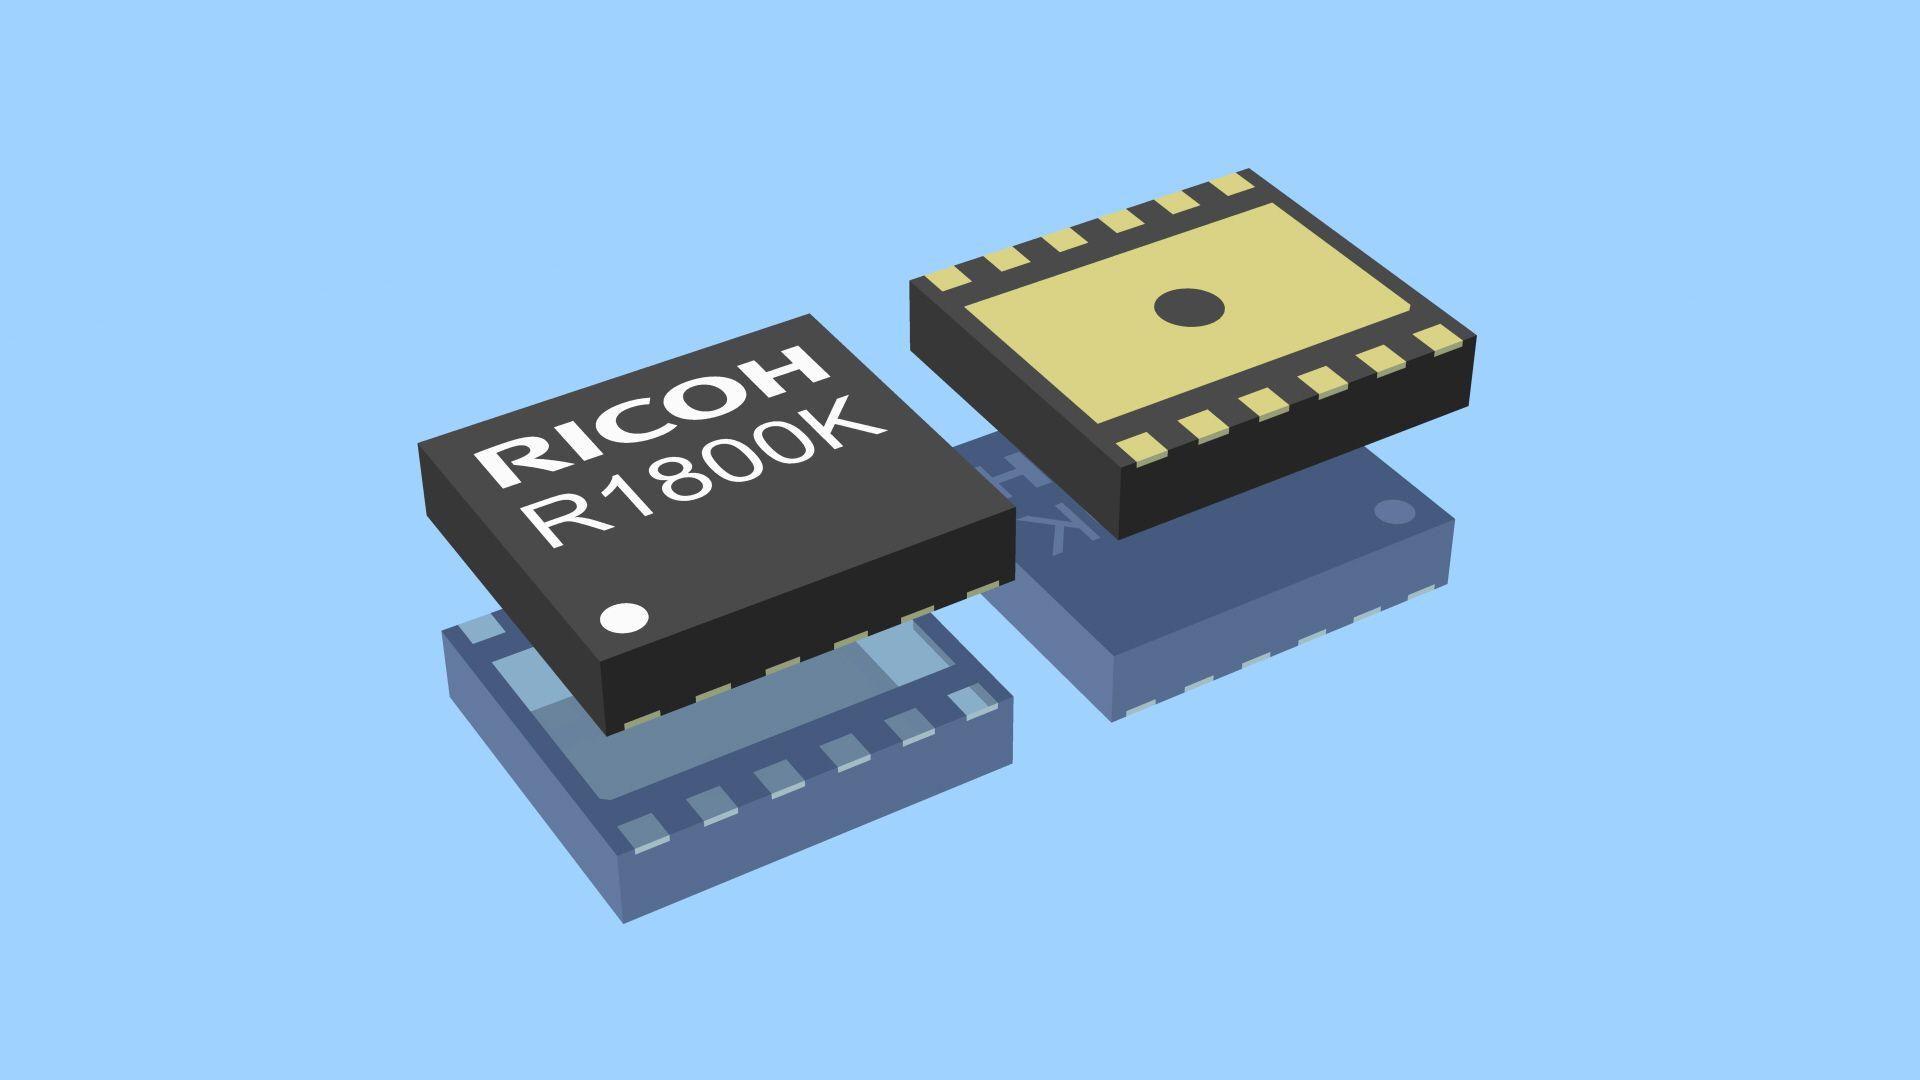 Current Ricoh Logo - Ricoh launches Buck DC/DC Converter with 144 nA quiescent current